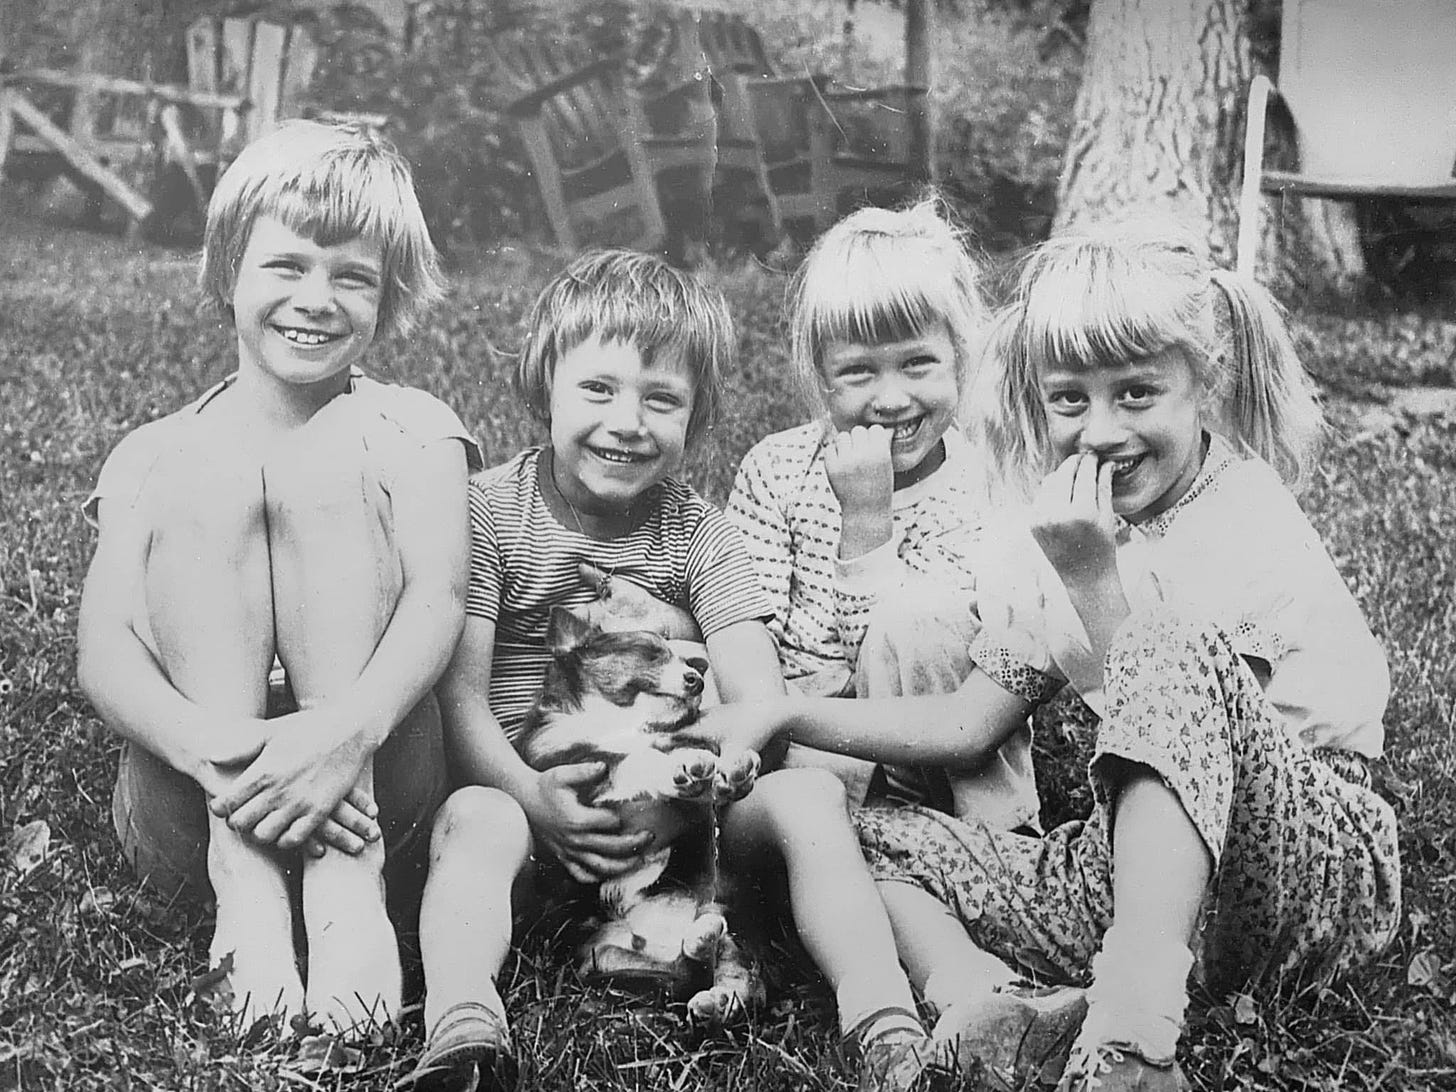 May be a black-and-white image of 3 people, child, blonde hair and people smiling